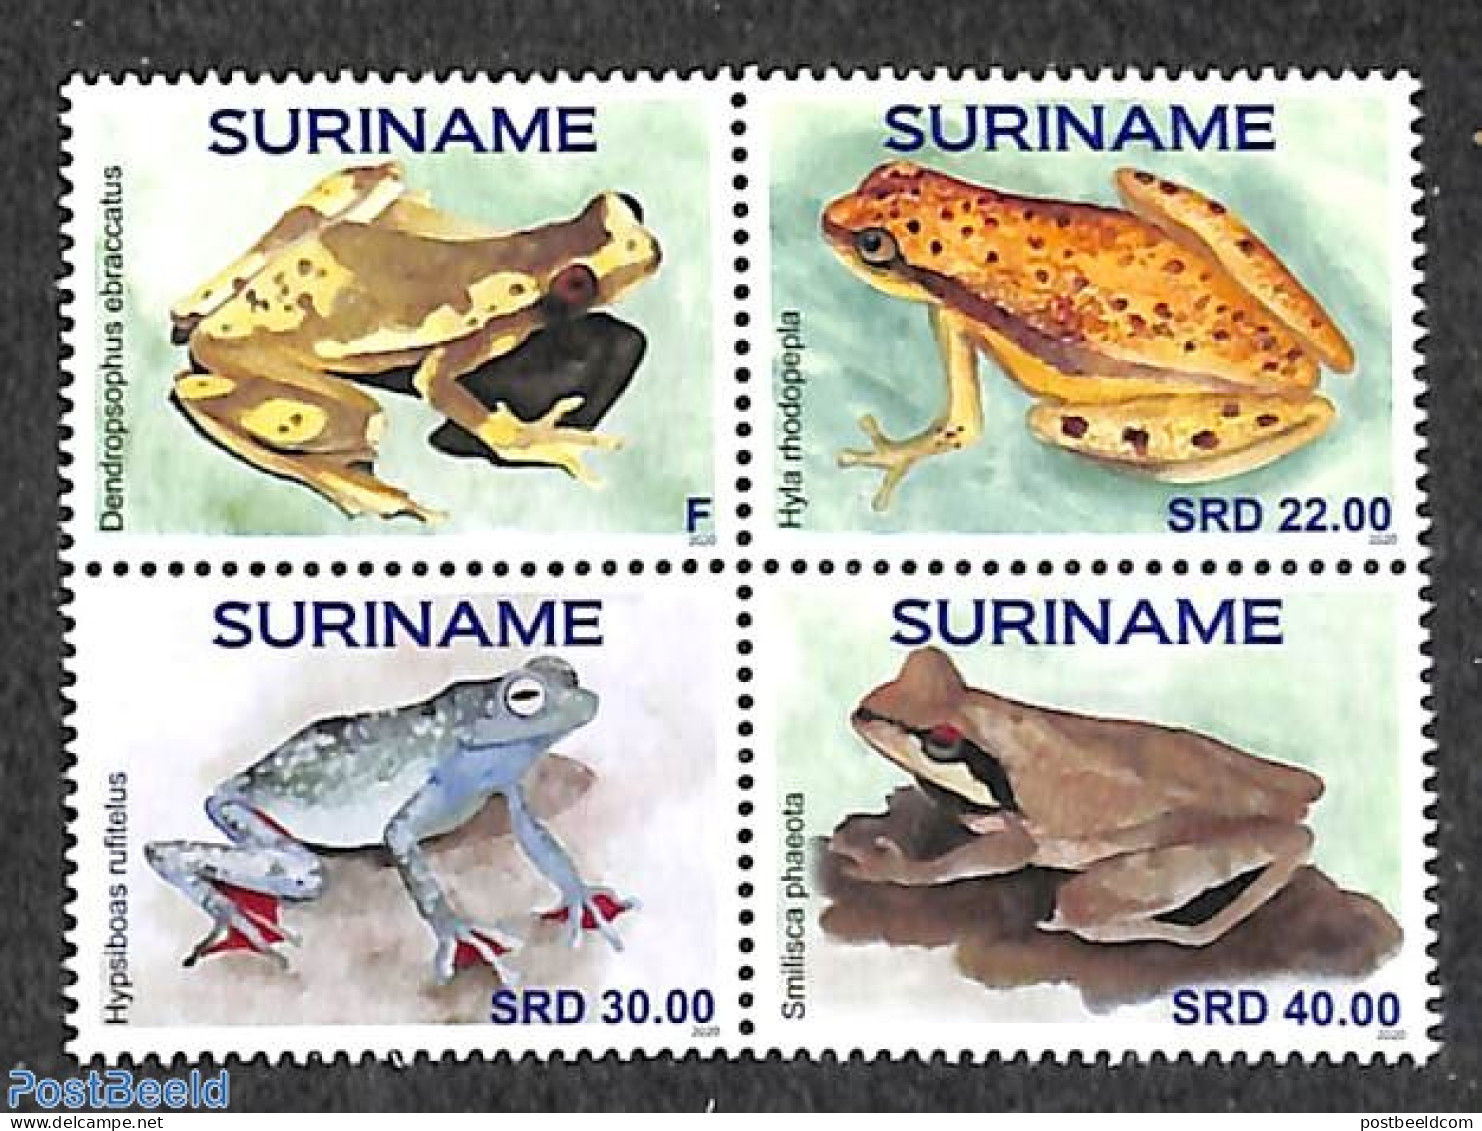 Suriname, Republic 2020 Frogs 4v [+], Mint NH, Nature - Frogs & Toads - Reptiles - Suriname